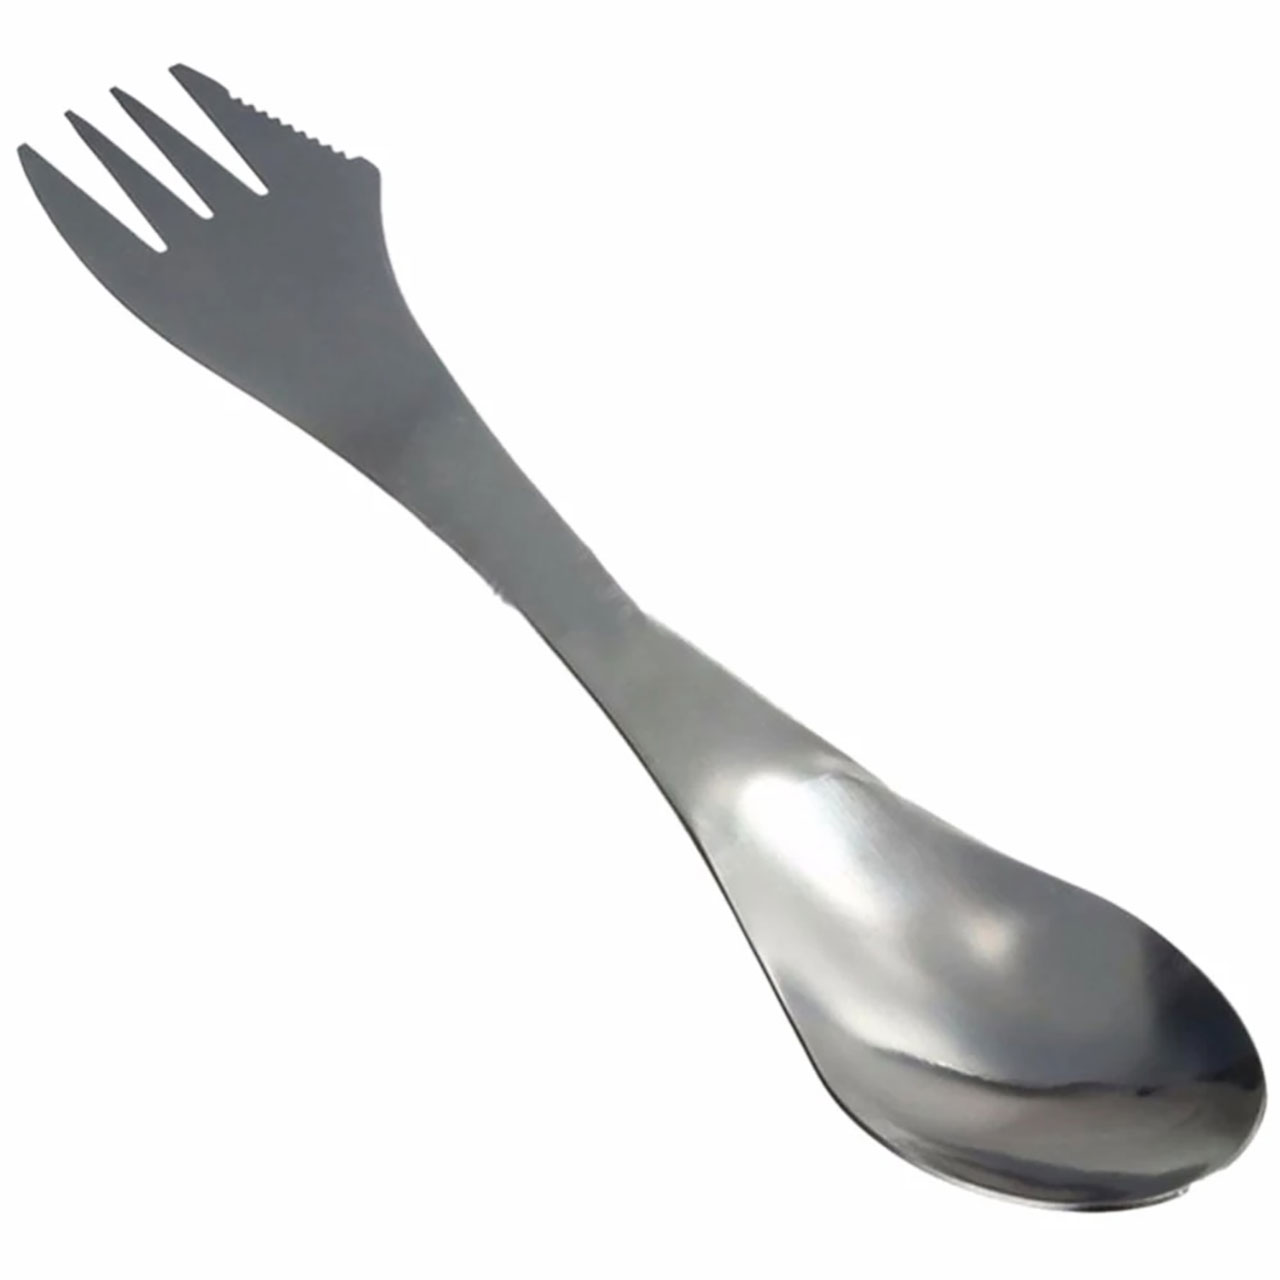 Three-in-one fork, spoon and knife